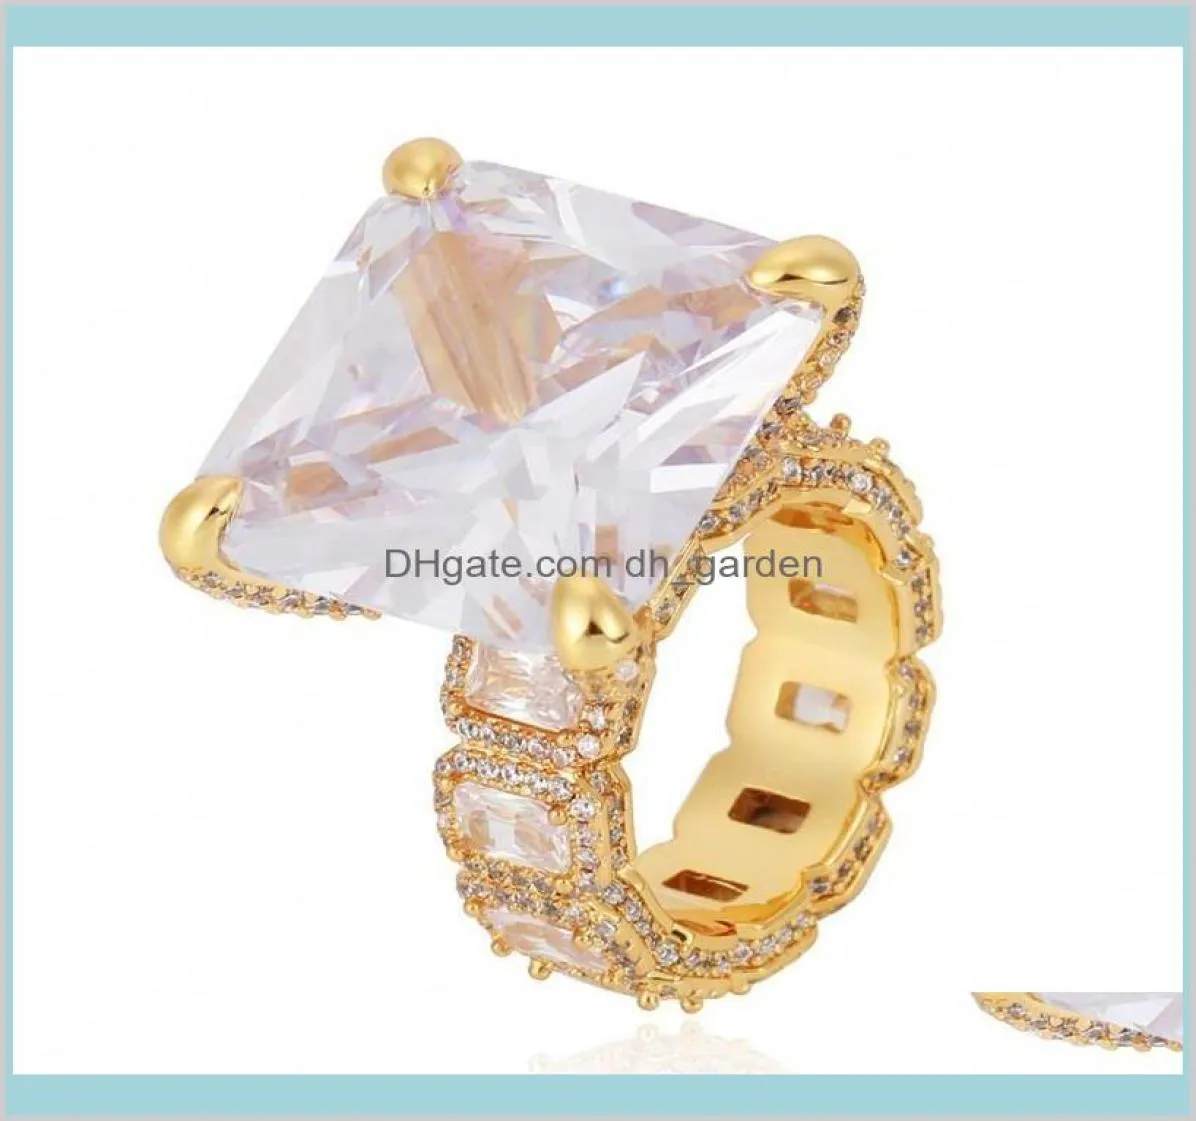 Europe och America Yellow Gold Plated Bling Ice Out Big Diamond Cz Stone för fina smycken Z209S Band Rings DR1GP6797426